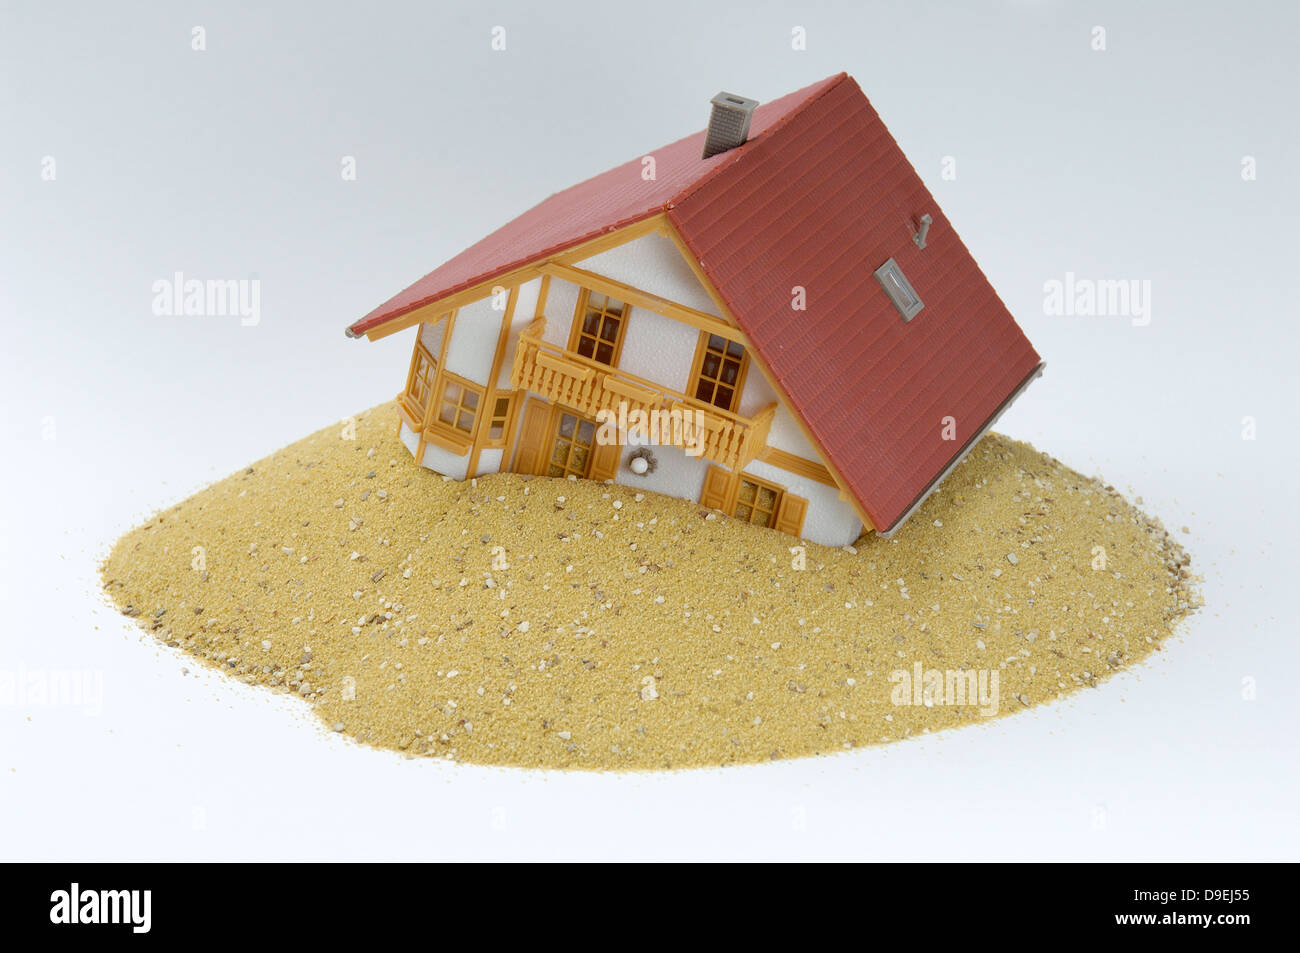 House model on sandy hill. Metaphor for unreliable construction financing. Stock Photo